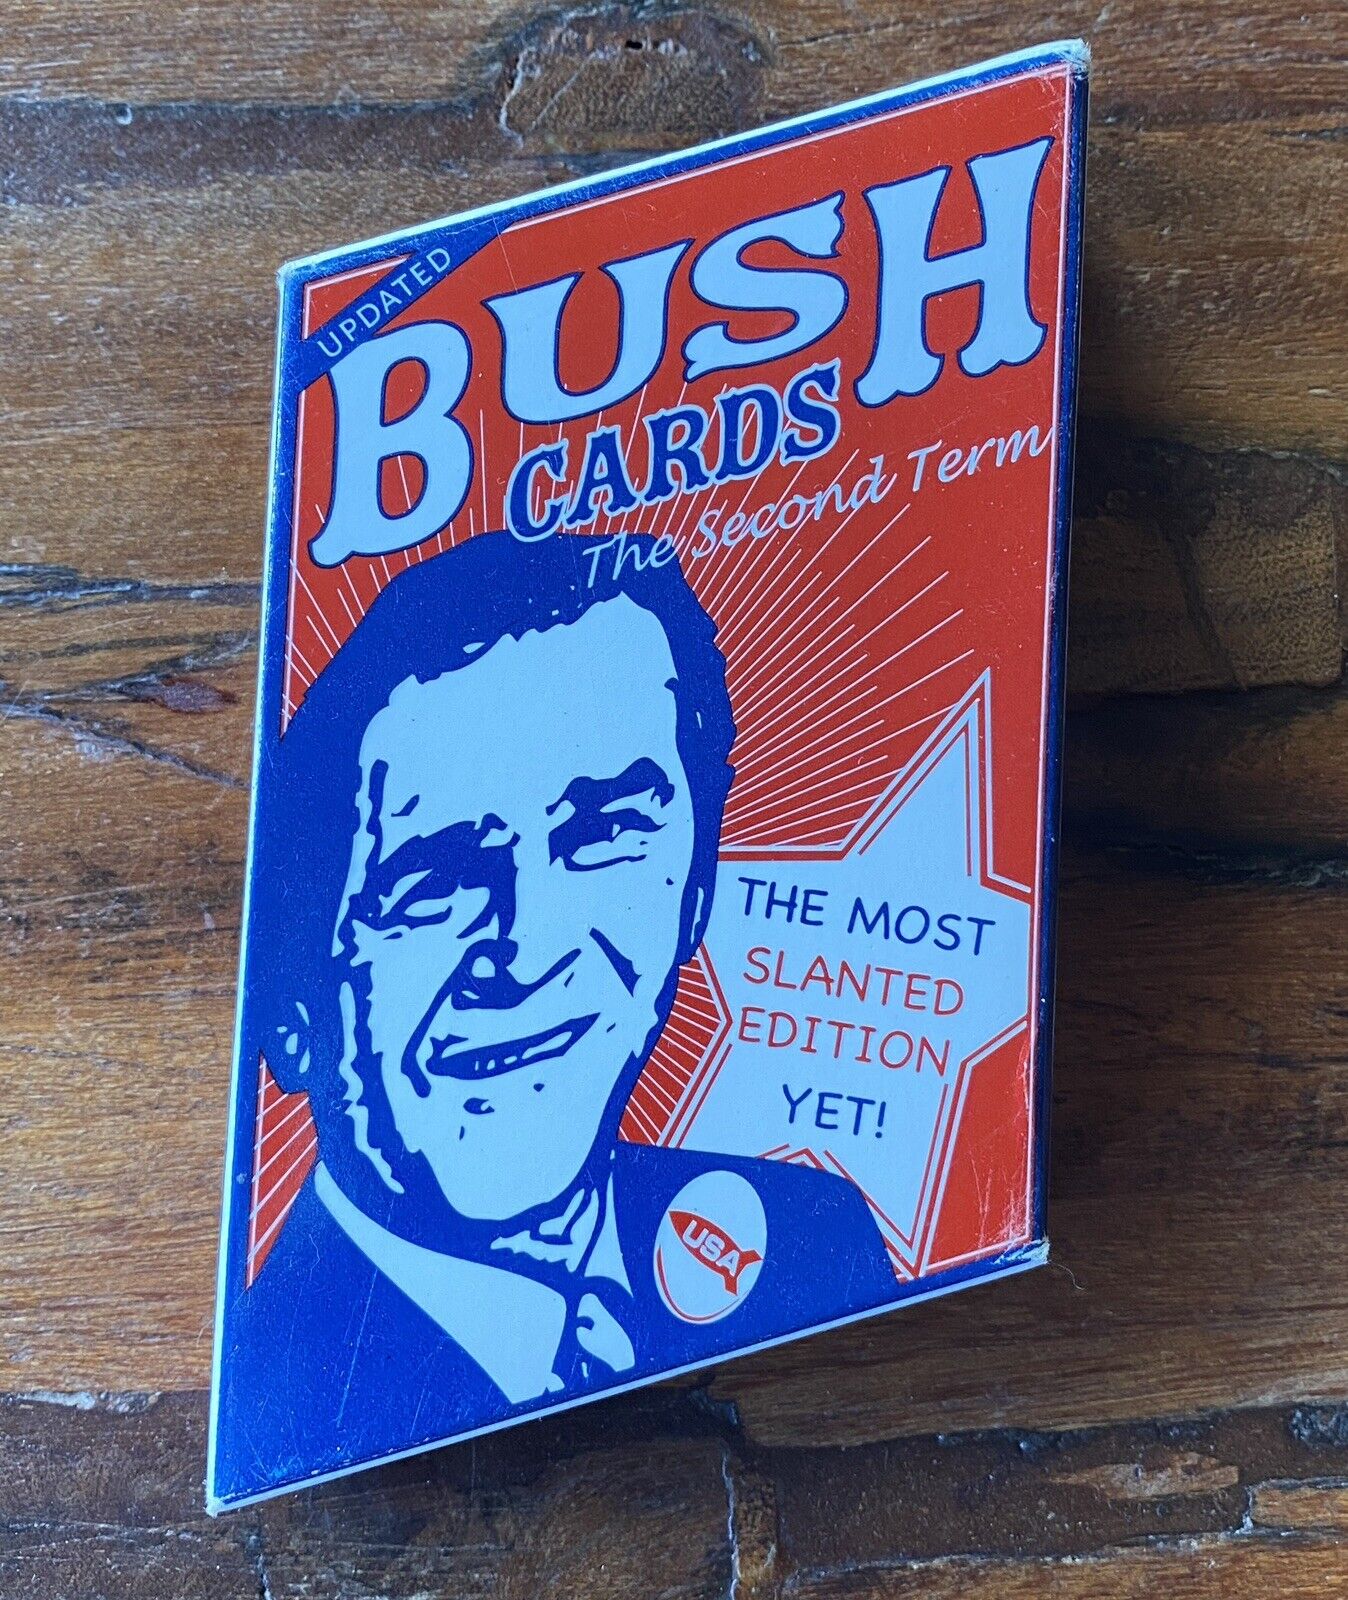 George W Bush Playing Cards The Most Slanted Edition Yet NEW Gag Joke Far Right